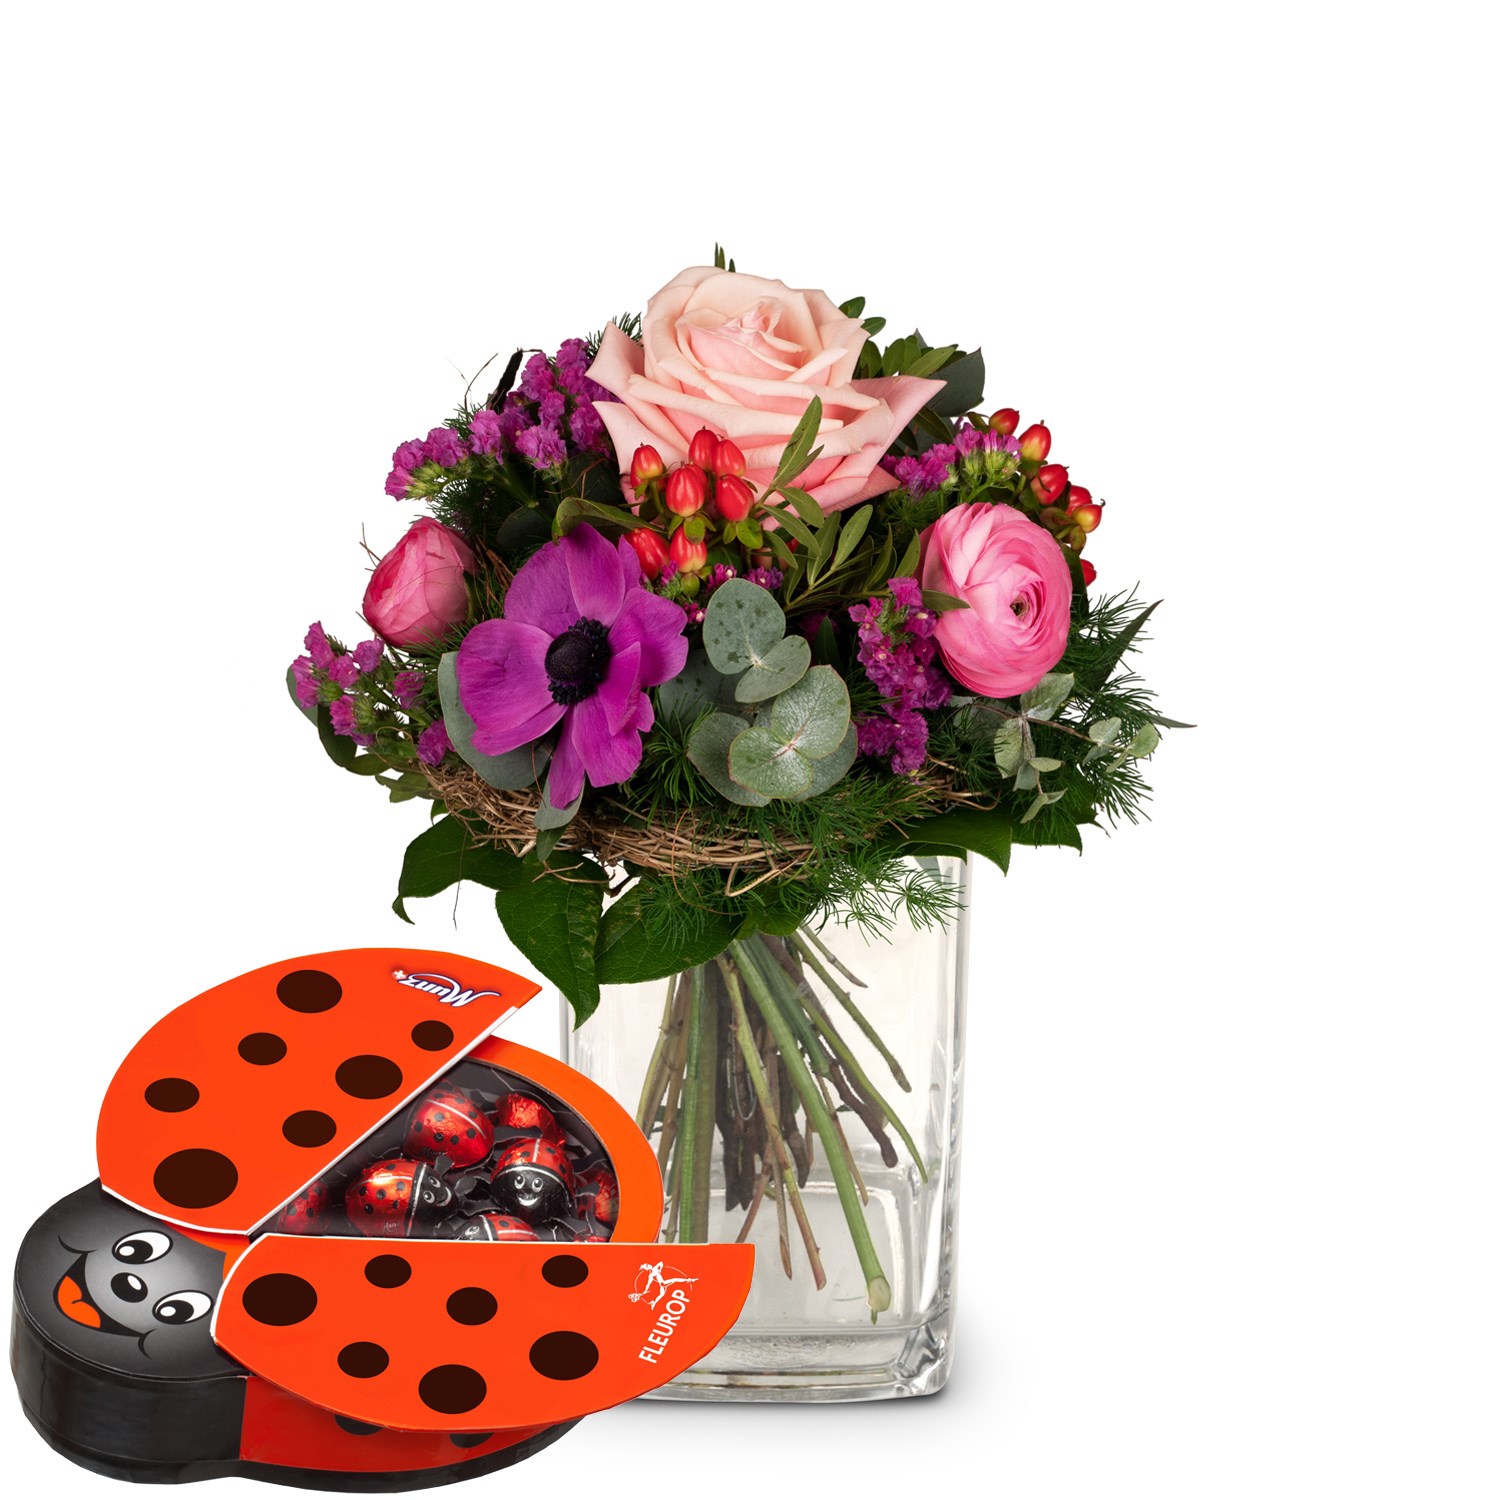 product image for Sweet Surprise with Munz chocolate ladybird